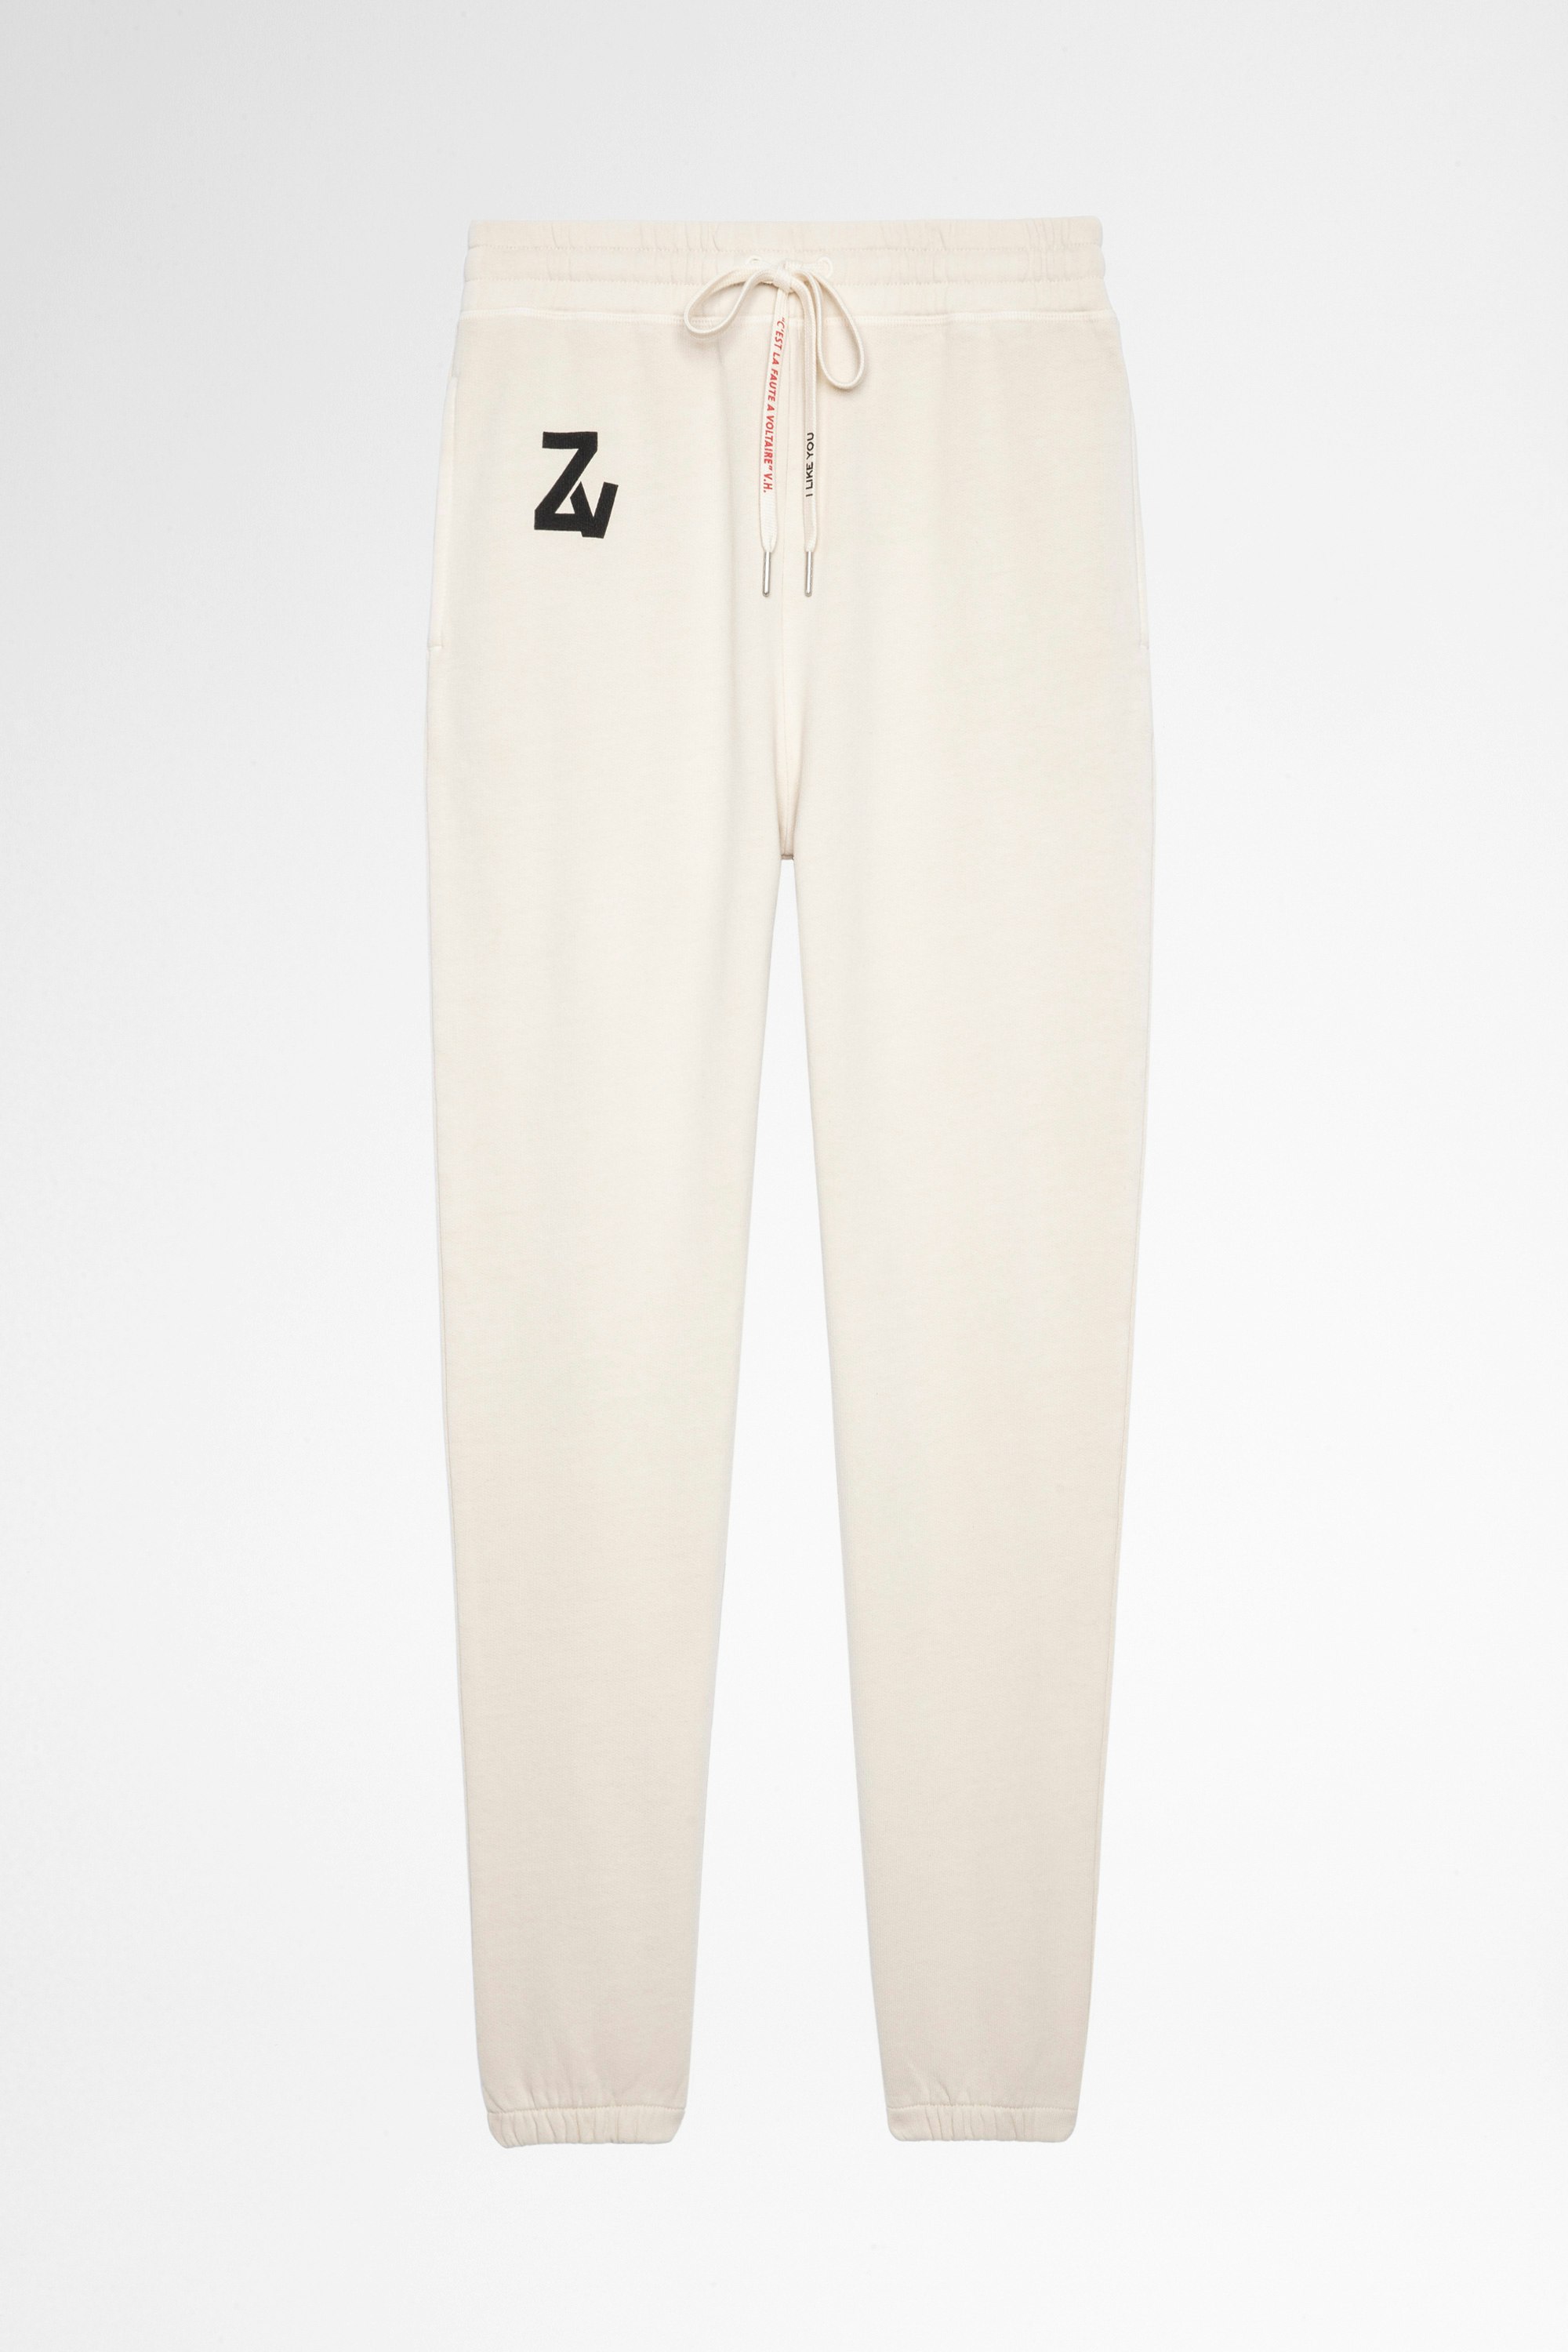 Steevy Sweatpants Women's beige cotton sweatpants. This product is GOTS certified and made with fibers from organic farming.